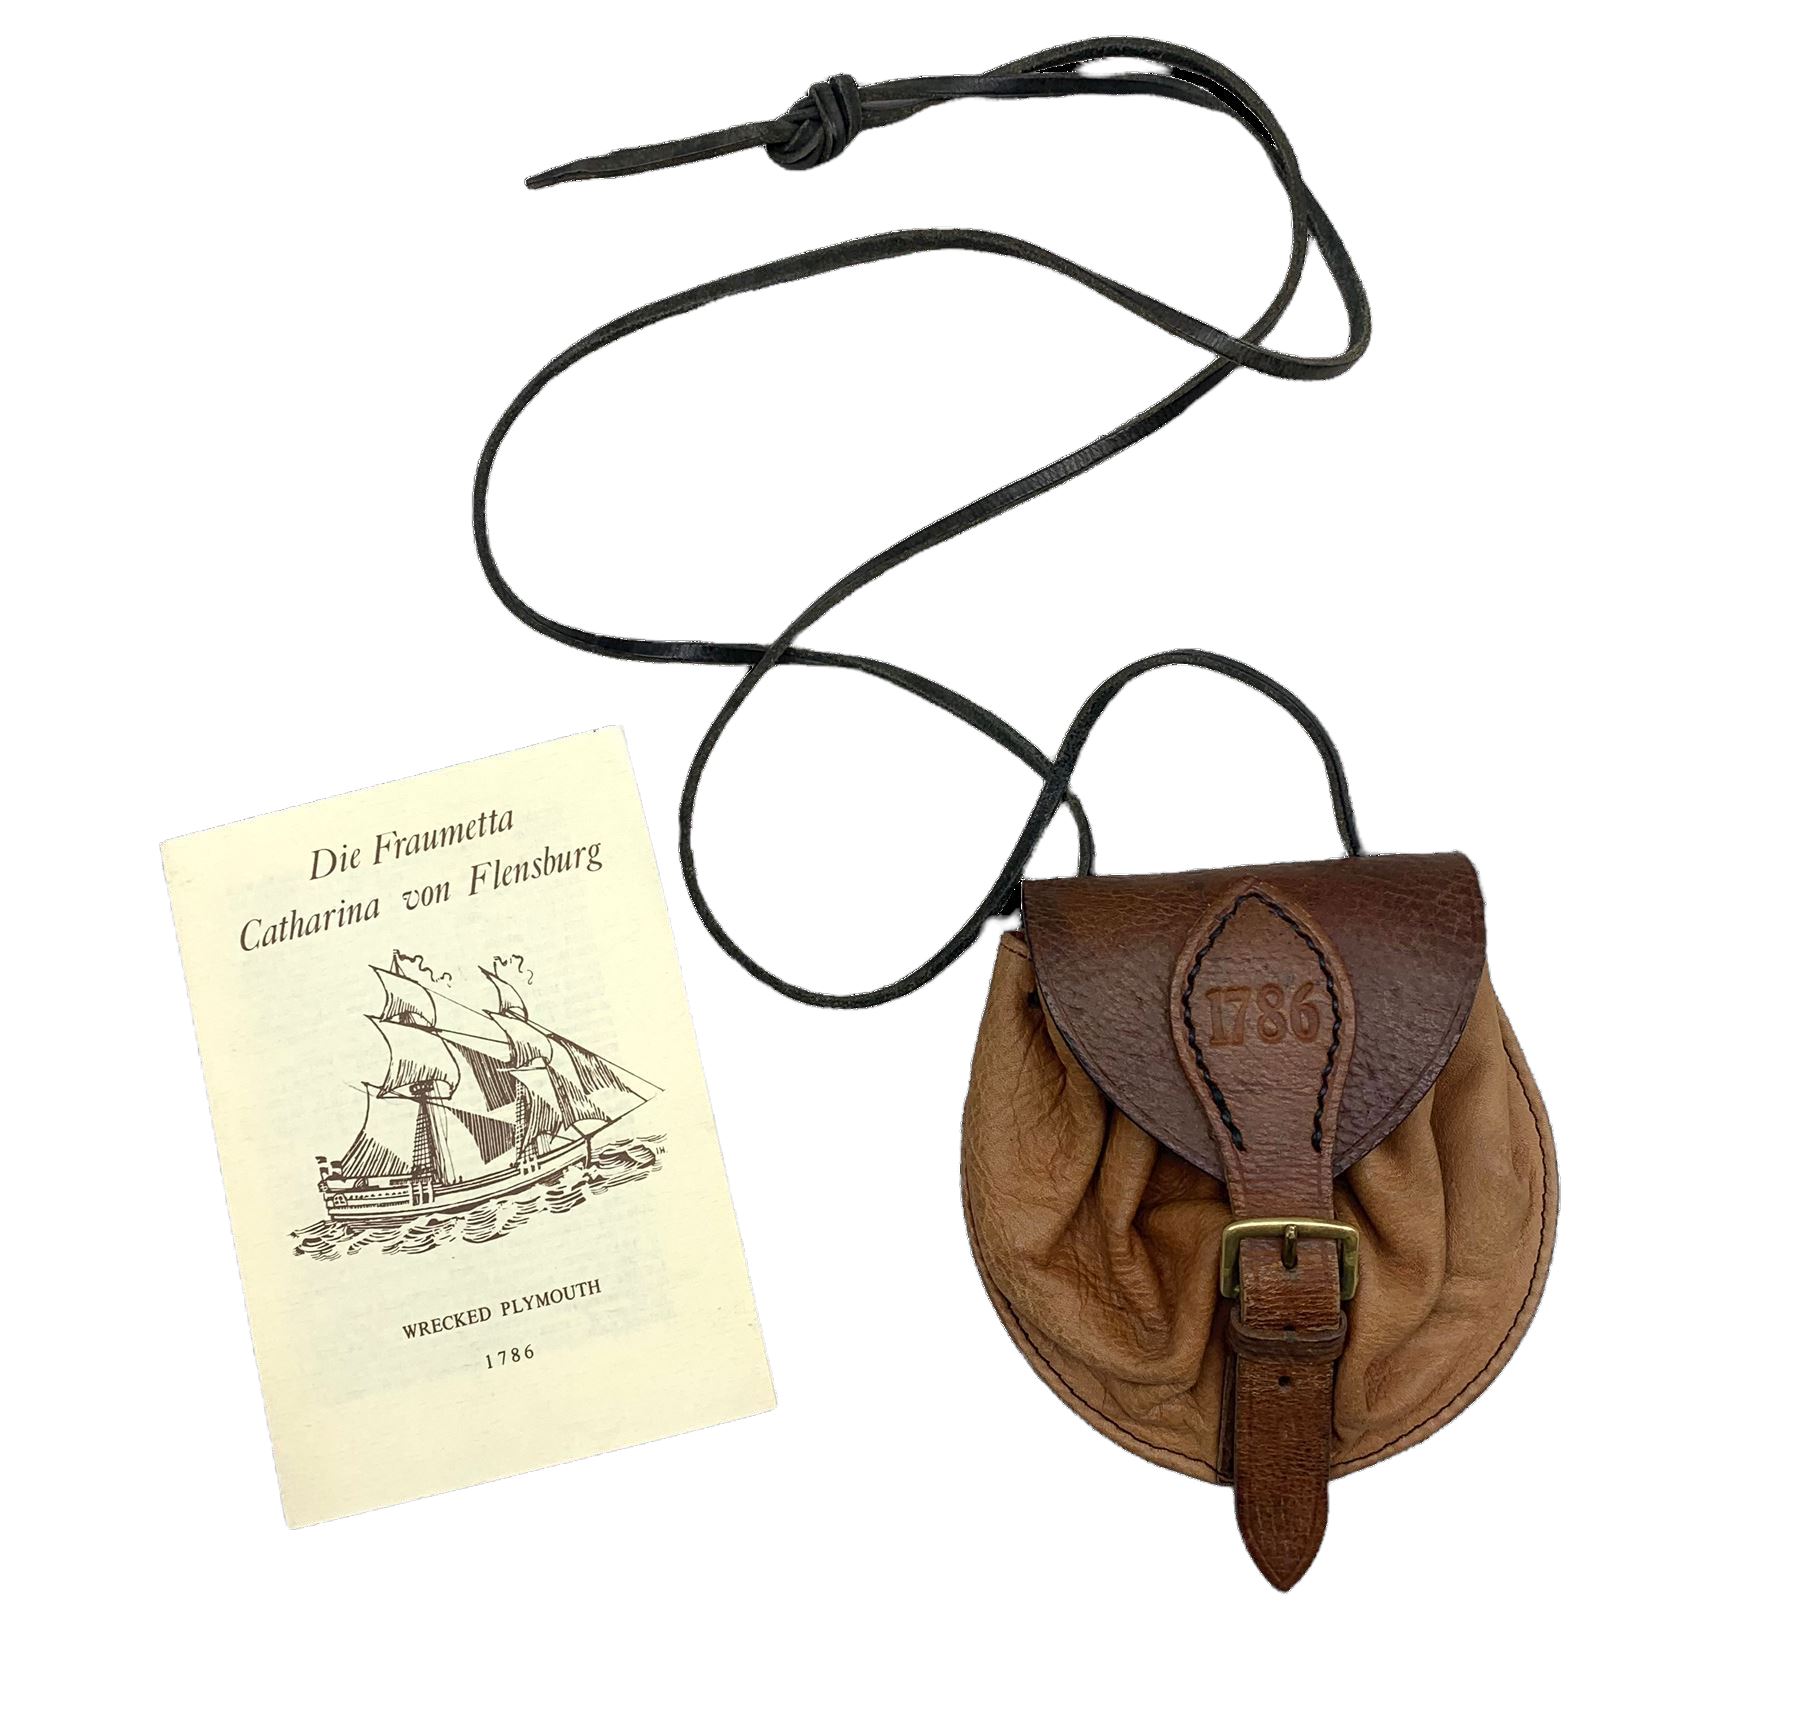 Coin purse produced from leather recovered from the cargo of the Brigantine "Die Fraumetta Catharina